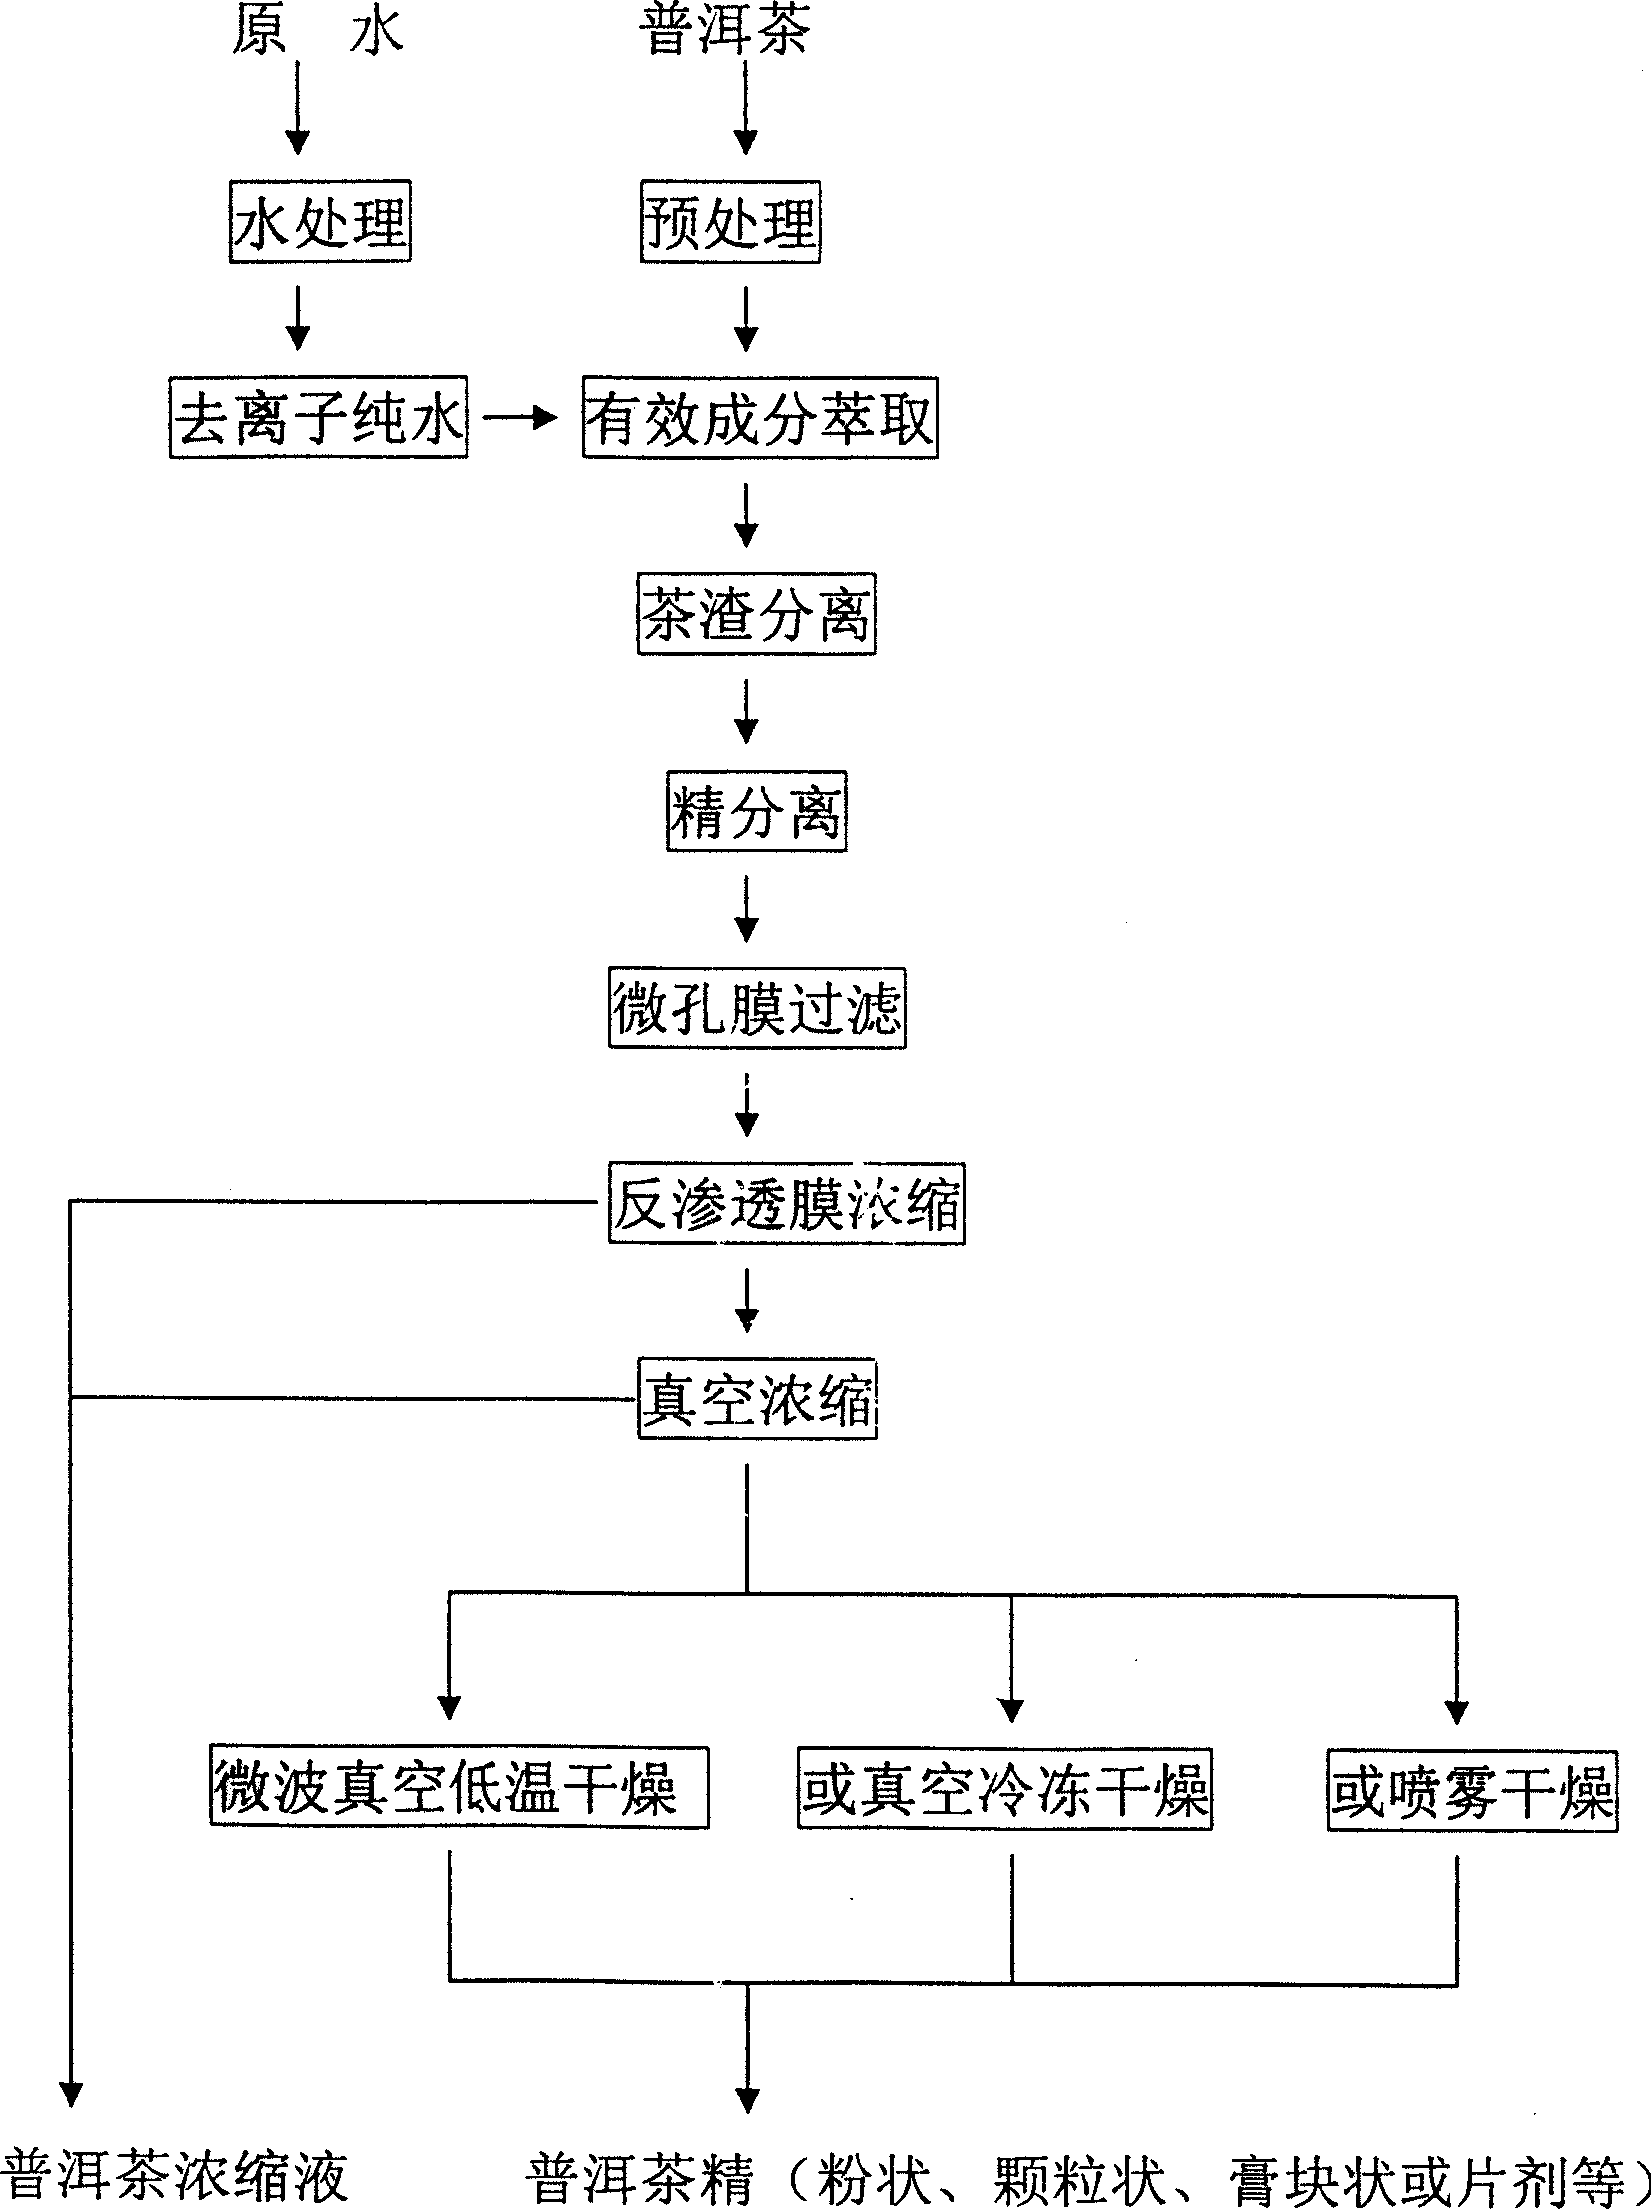 'Puer' caffeine and processing method